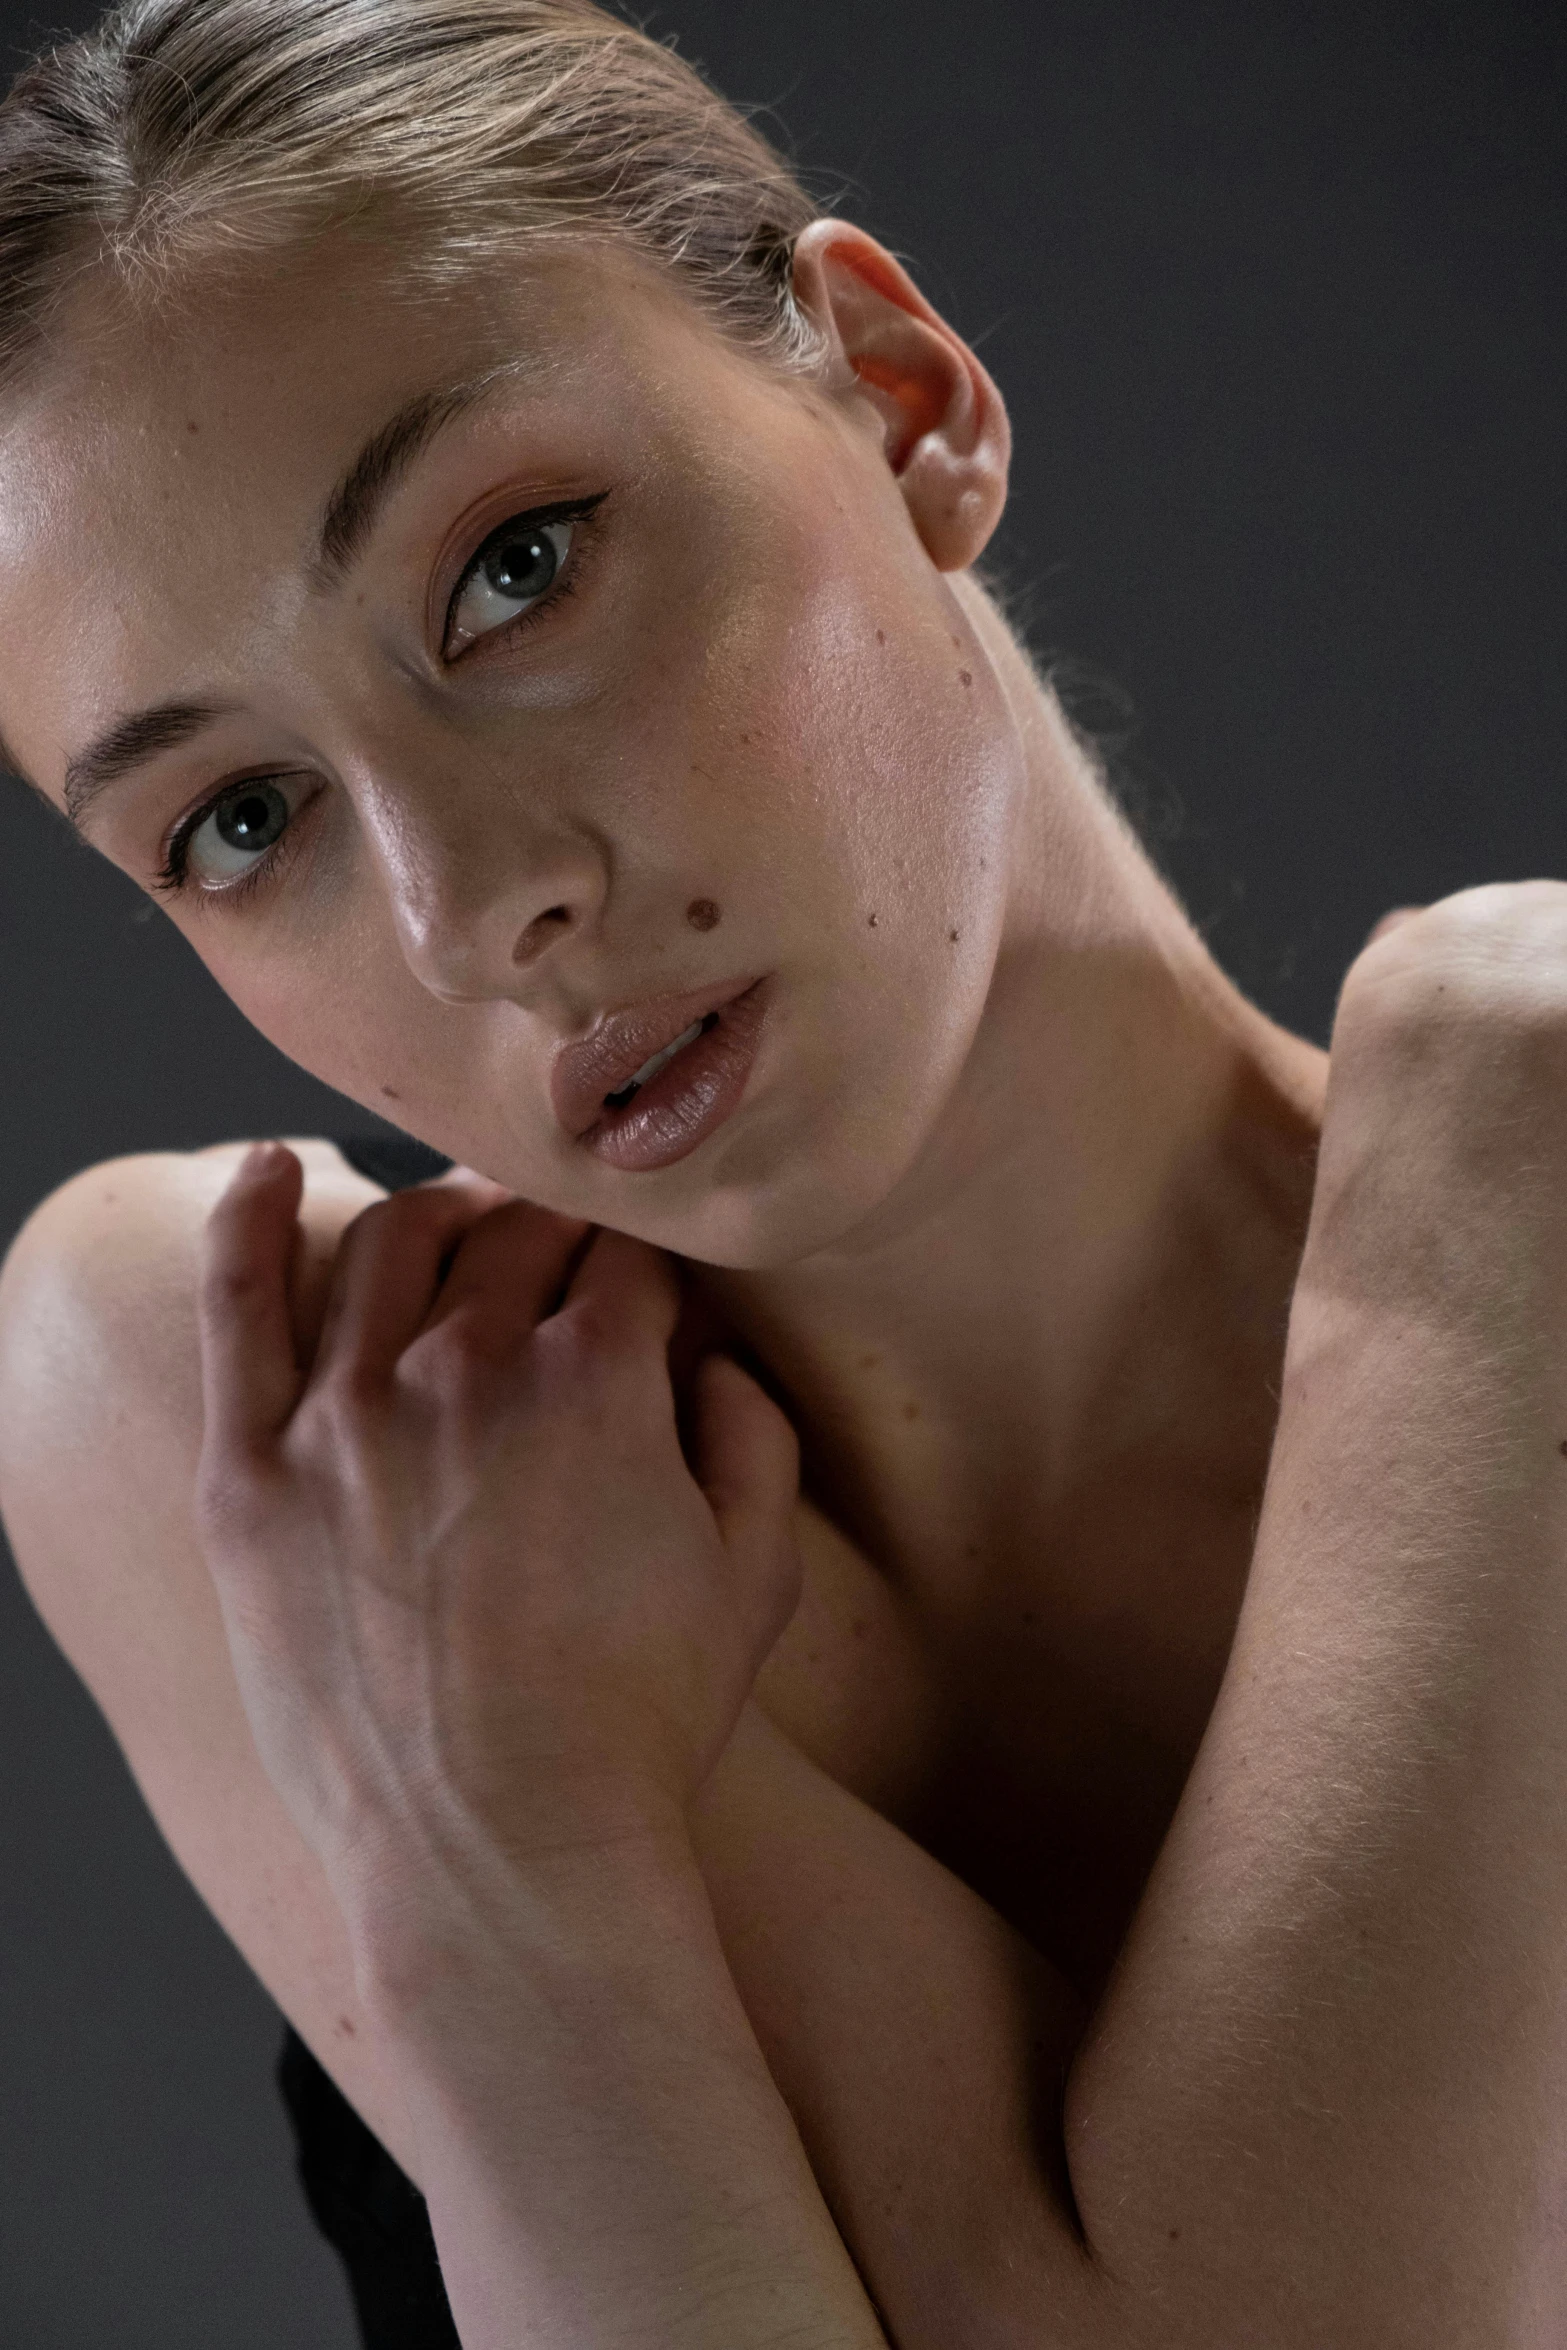 a beautiful young woman posing for a picture, inspired by Elizabeth Polunin, featured on zbrush central, hyperrealism, dewy skin, non binary model, synthetic bio skin, shot with sony alpha 1 camera